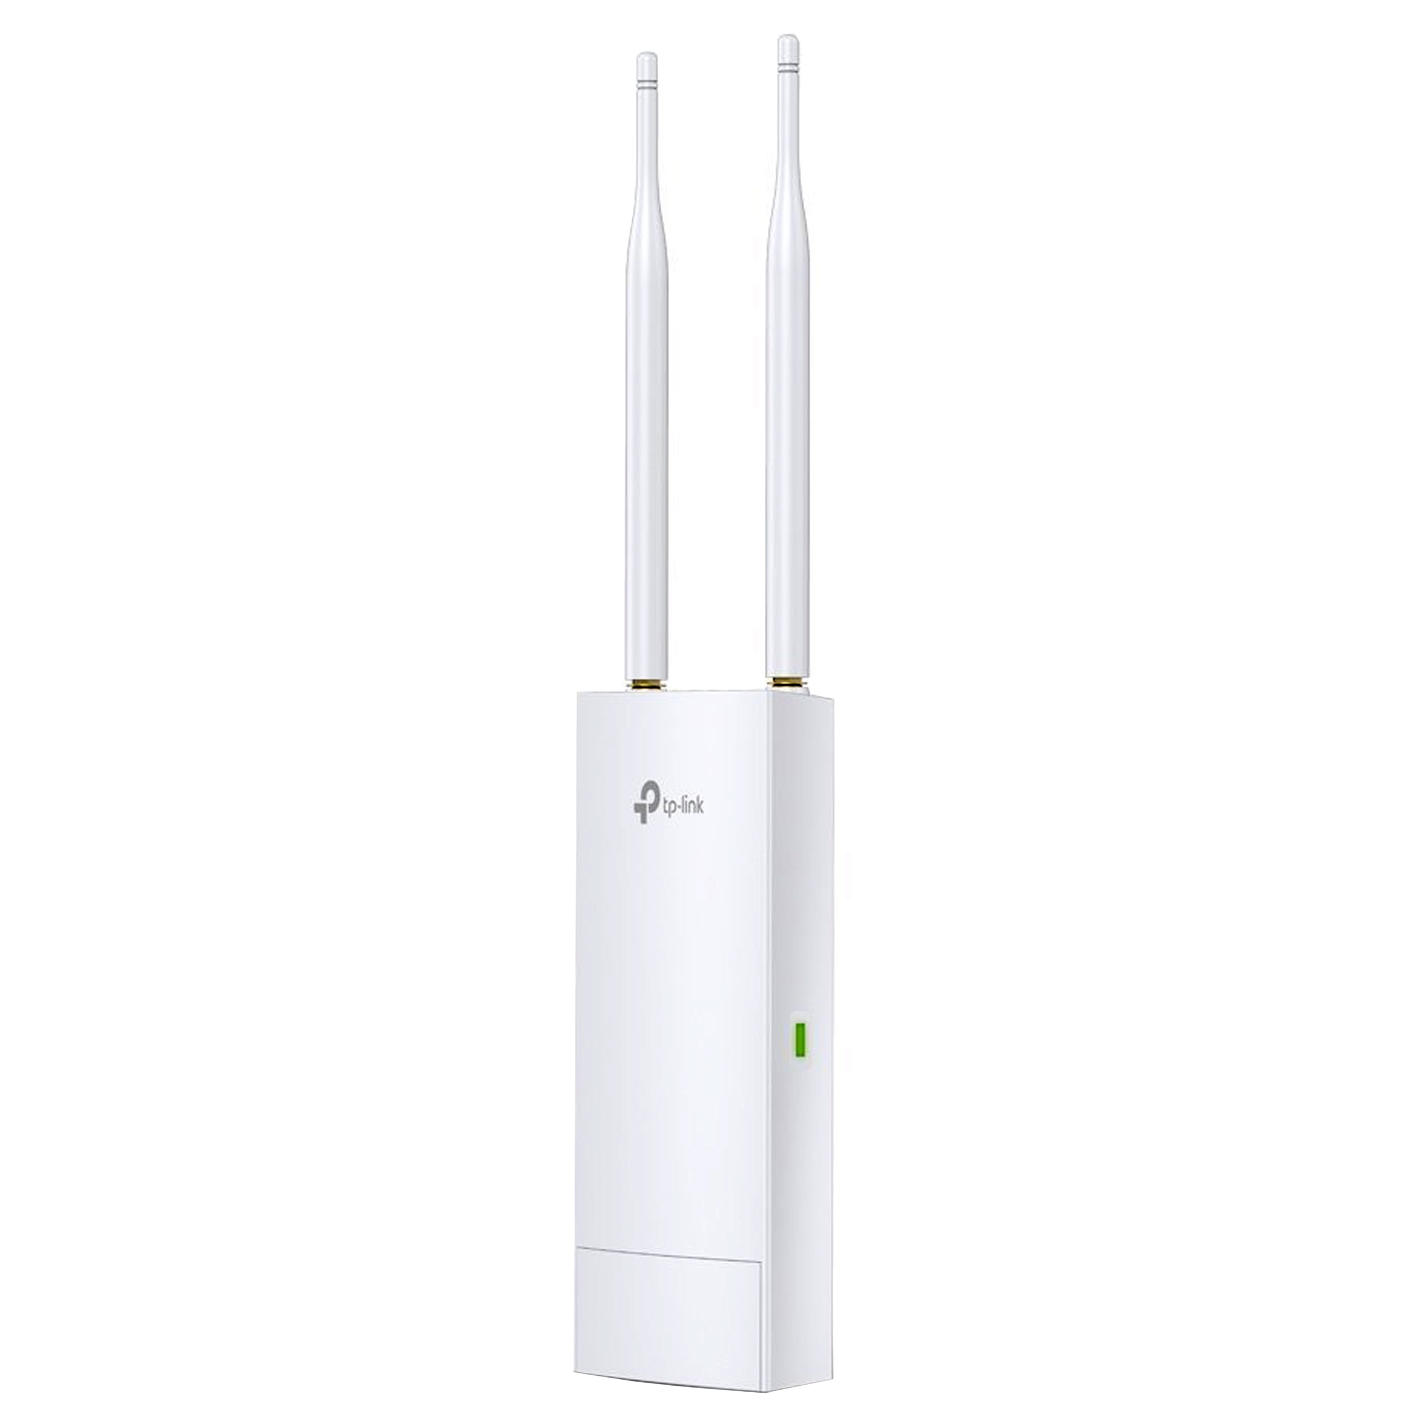 TP-Link N300 WIFI Outdoor Access Point